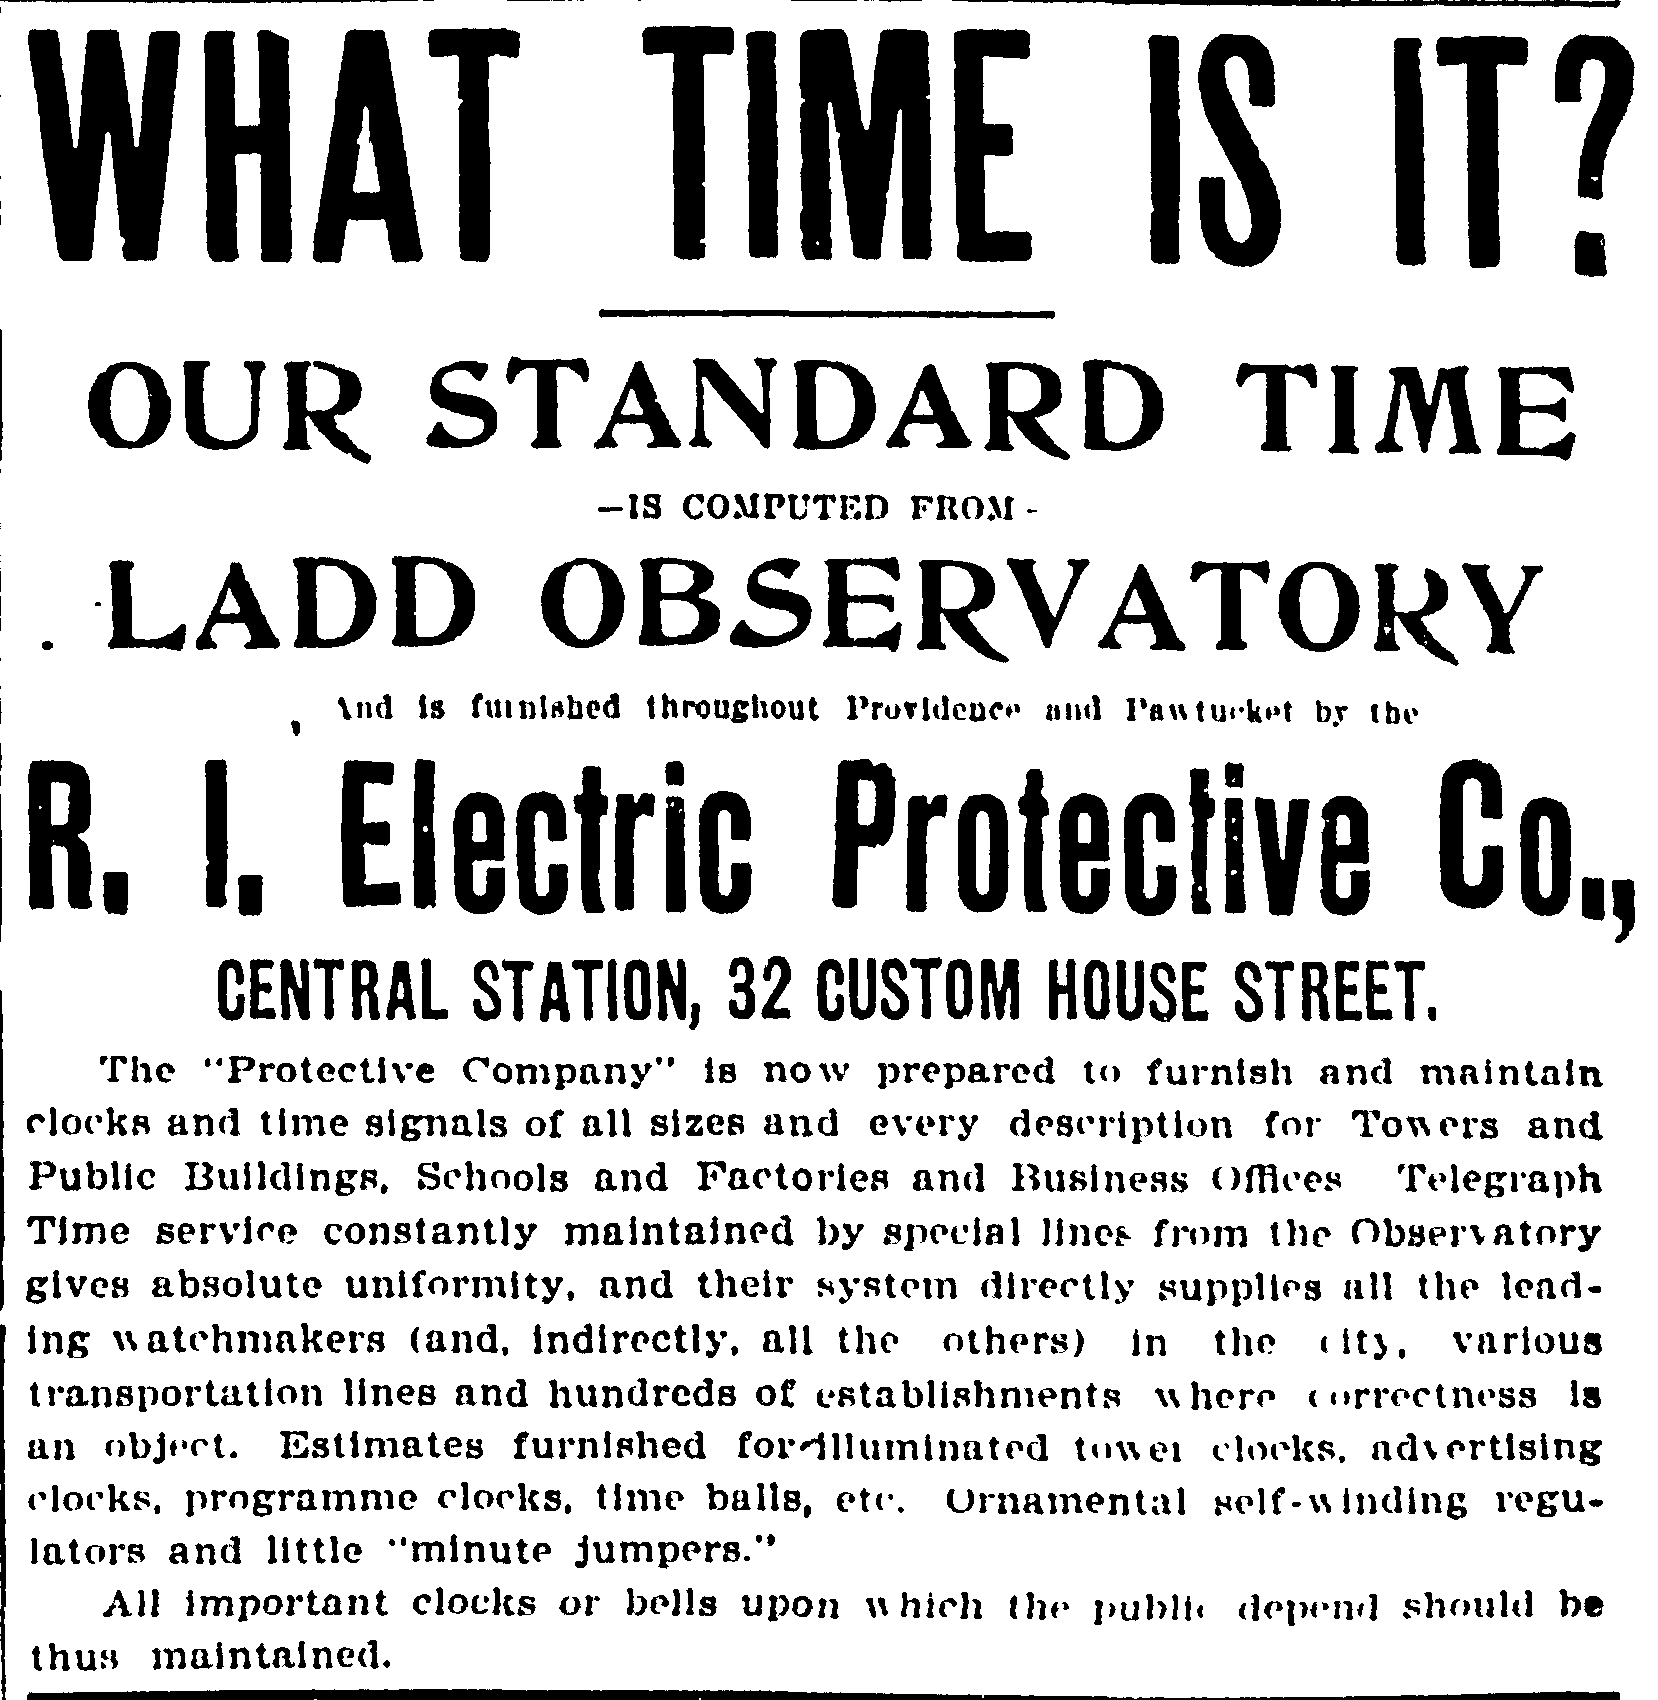 File:Standard Time from Ladd Observatory.png - Wikipedia